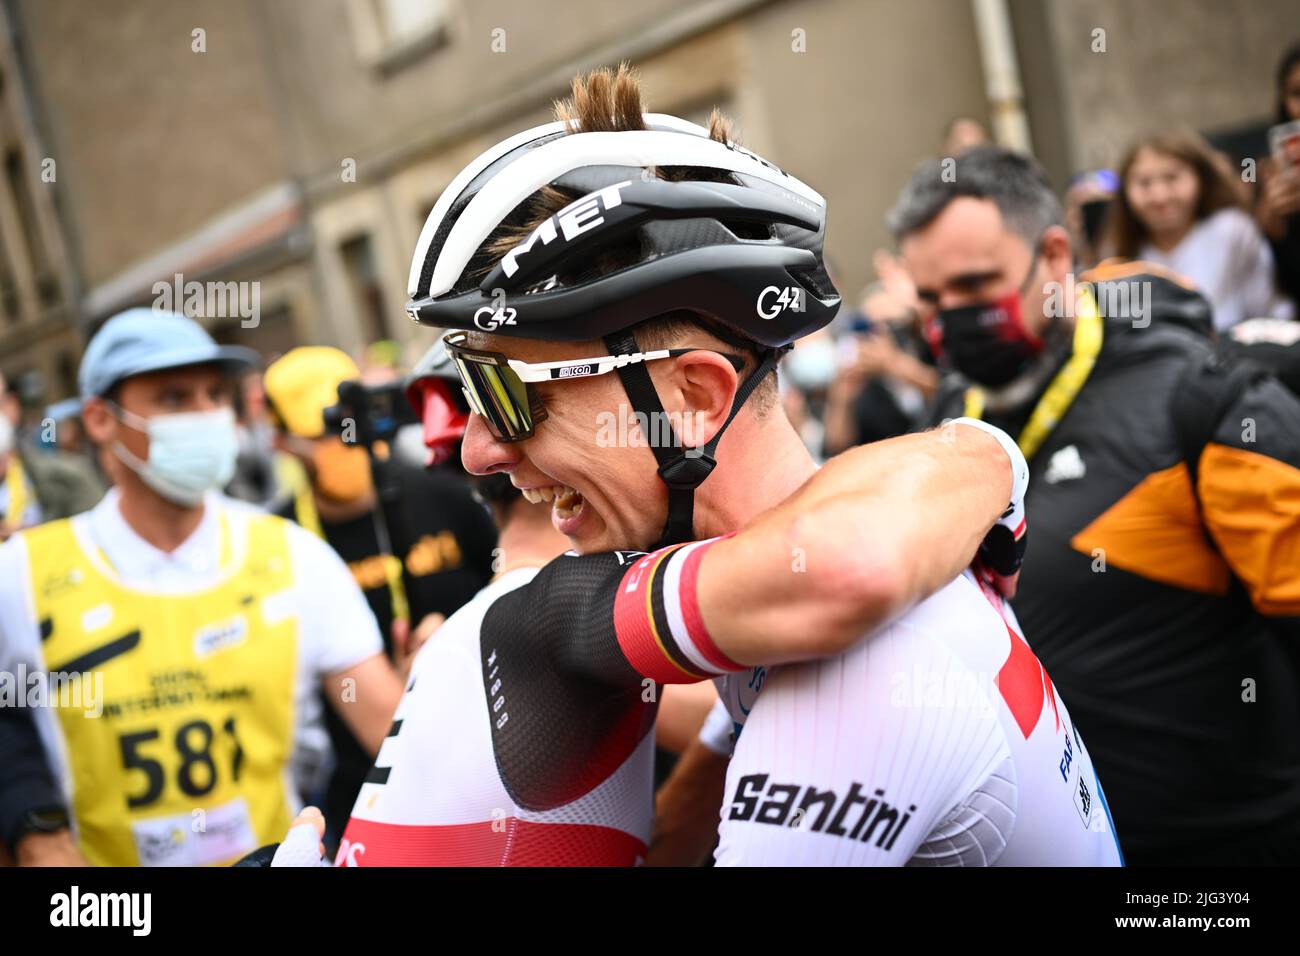 Tadej Pogacar of Slovenia and UAE Team Emirates celebrates after winning during Stage 6 of the Tour De France, Binche to Longwy, on Thursday 7th July 2022 Photo credit should read: JJ/POOL/Godingimages Credit: Peter Goding/Alamy Live News Stock Photo